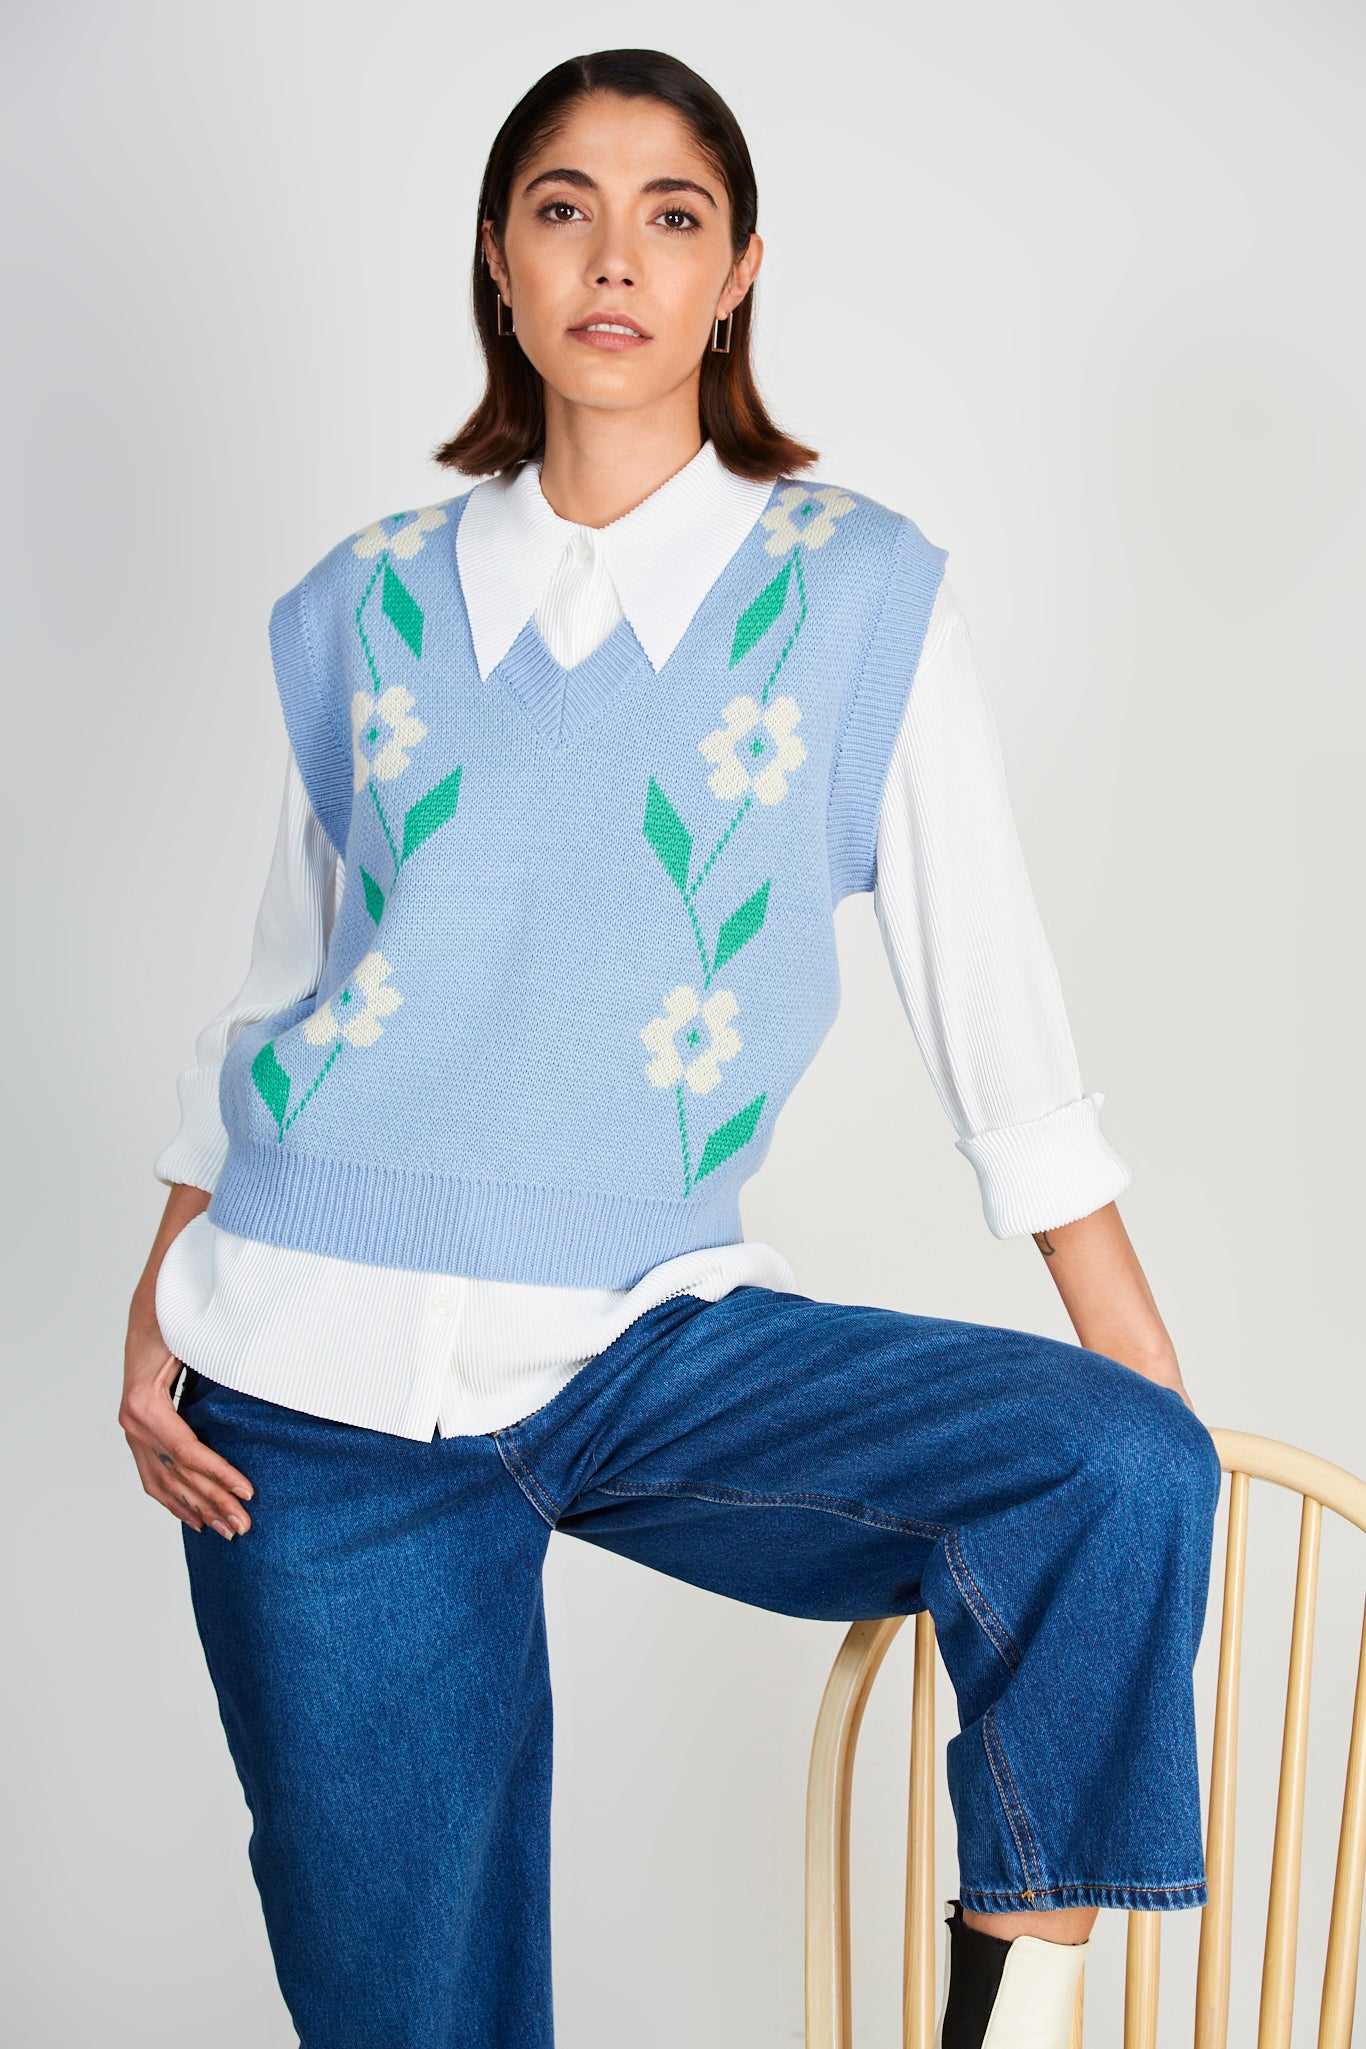 Blue and white intarsia large floral sweater vest